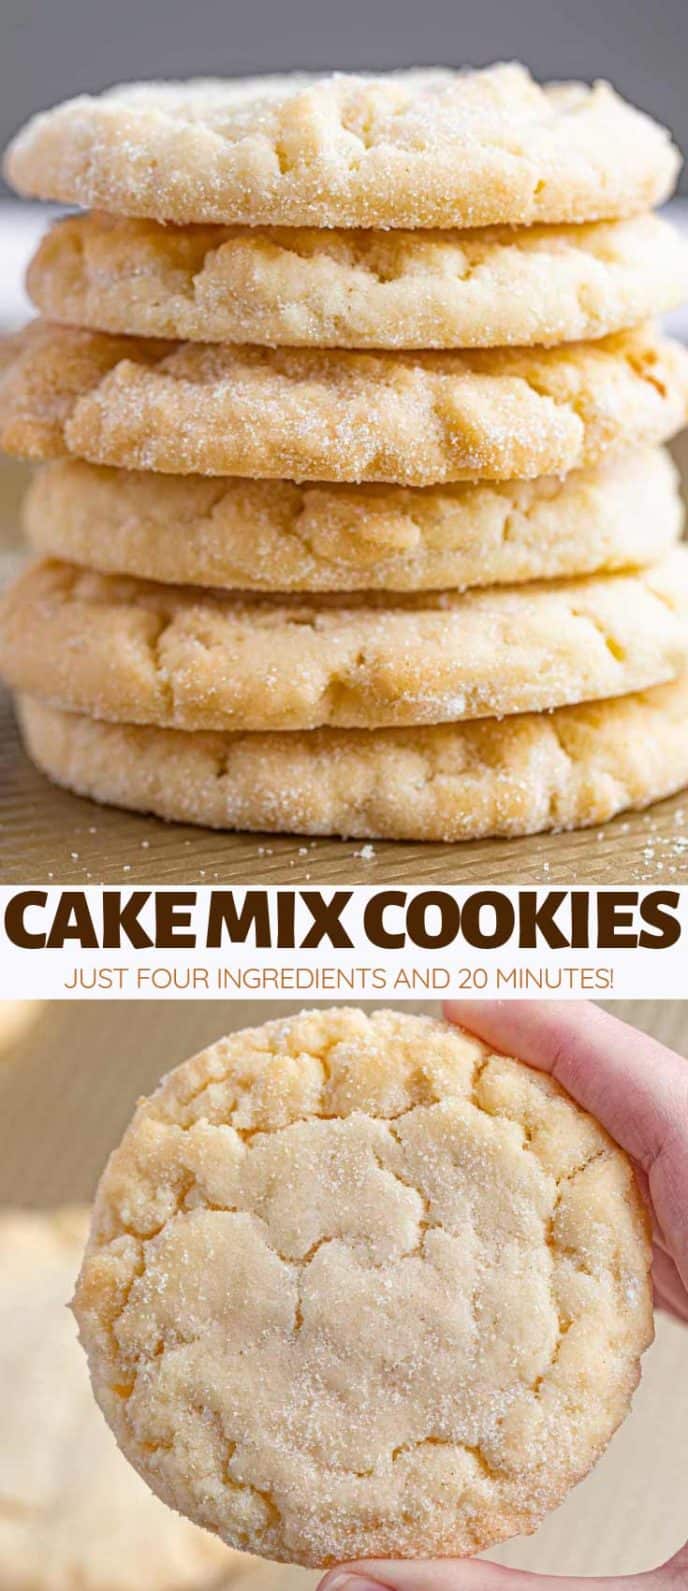 Easy 4 Ingredient Cake Mix Cookies Collage Photographs